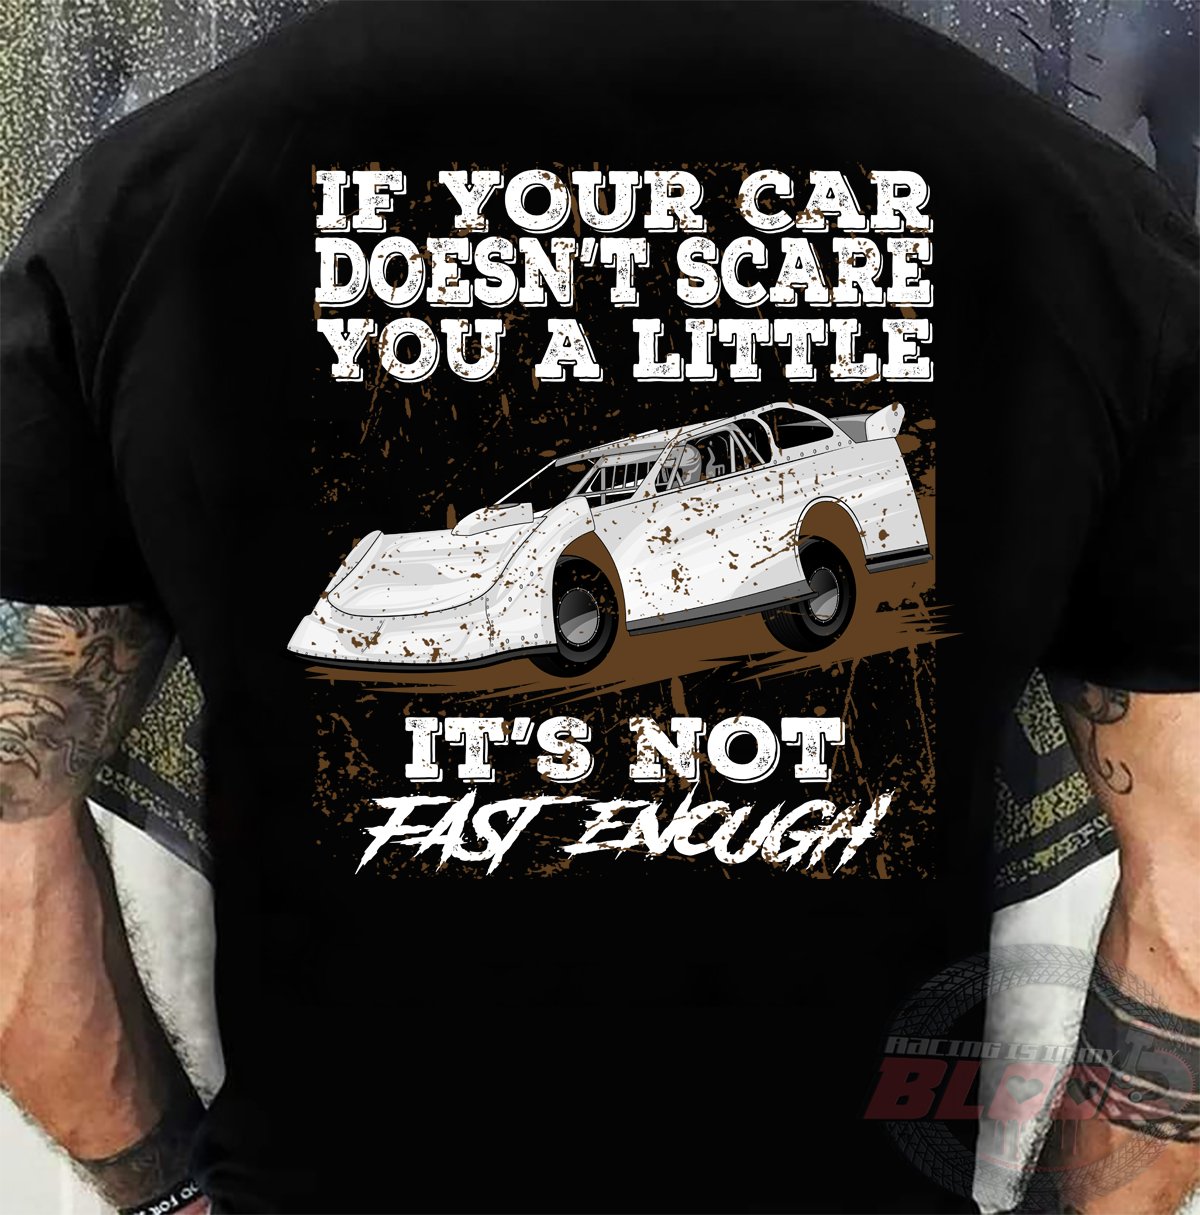 If your car doesn't scare you a little it's not fast enough - Dirt track racing